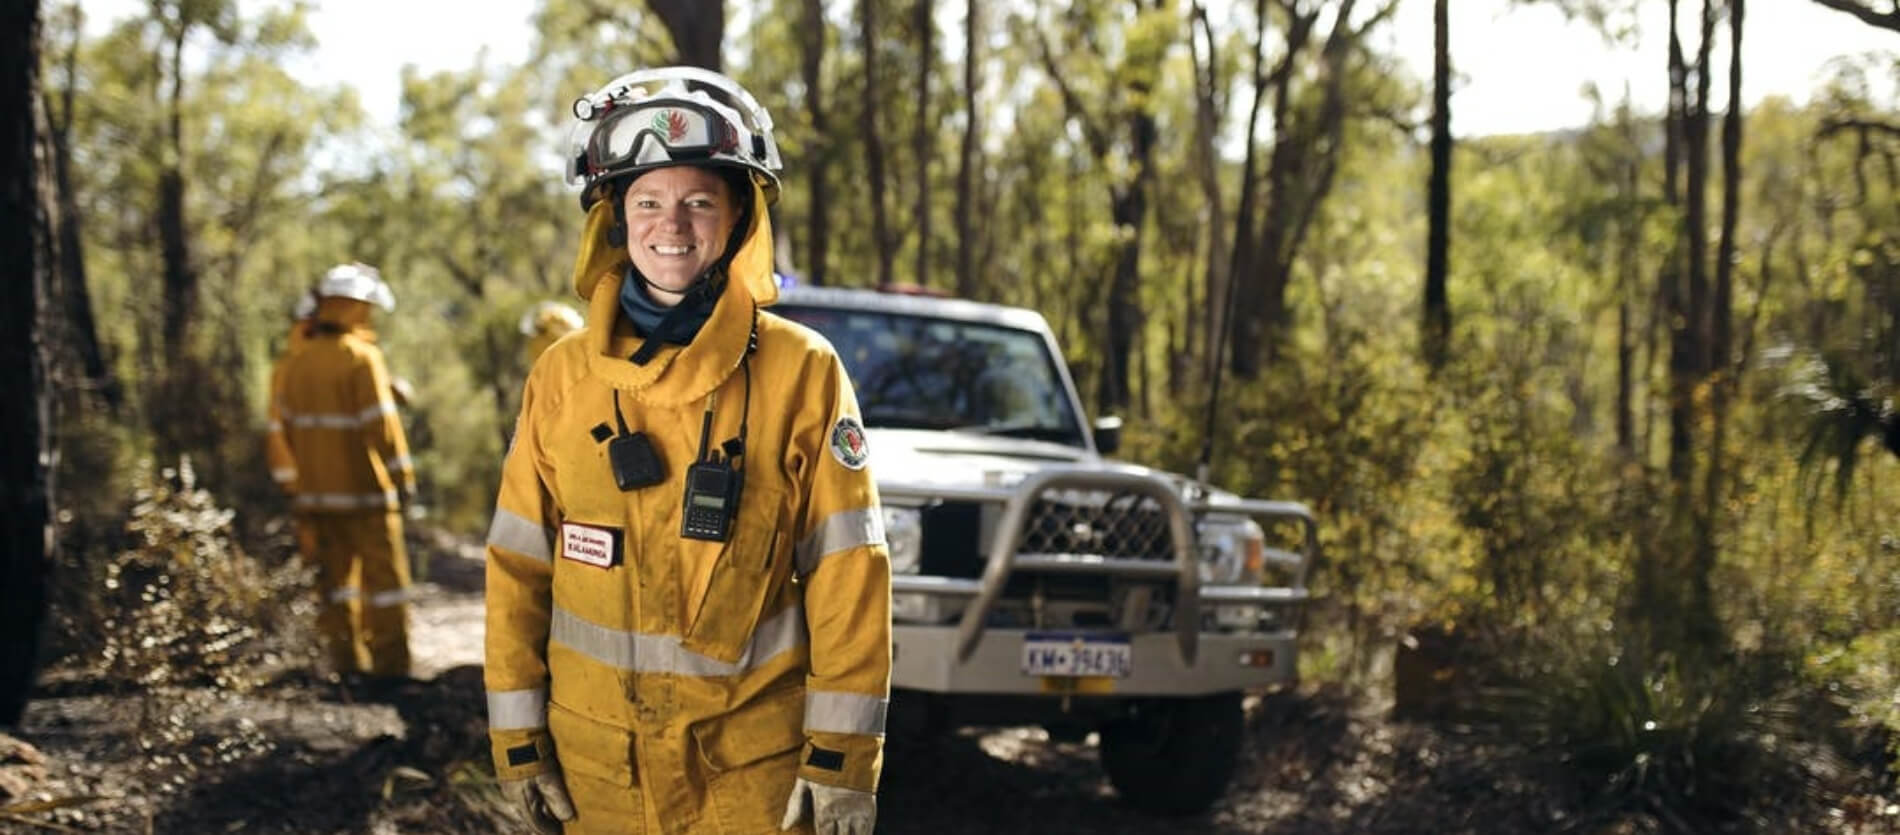 A member of the DFES team in front of their vehicle on a bush track